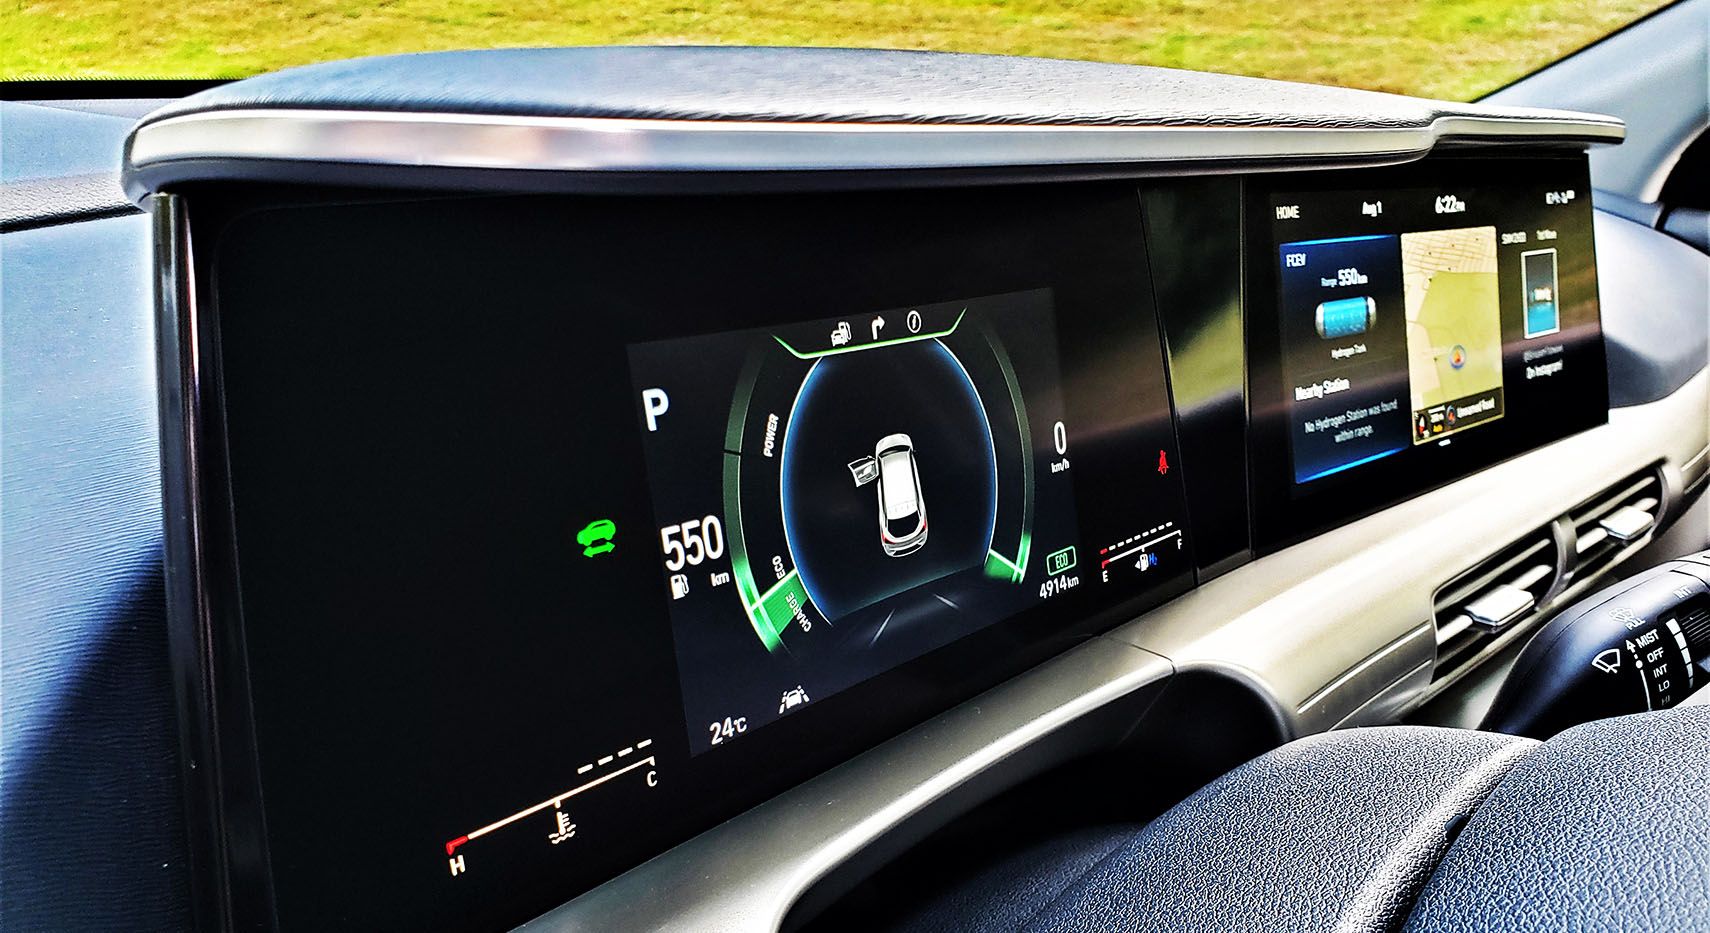 The dual-display gauge cluster and infotainment system is similar in design to Mercedes' MBUX system.